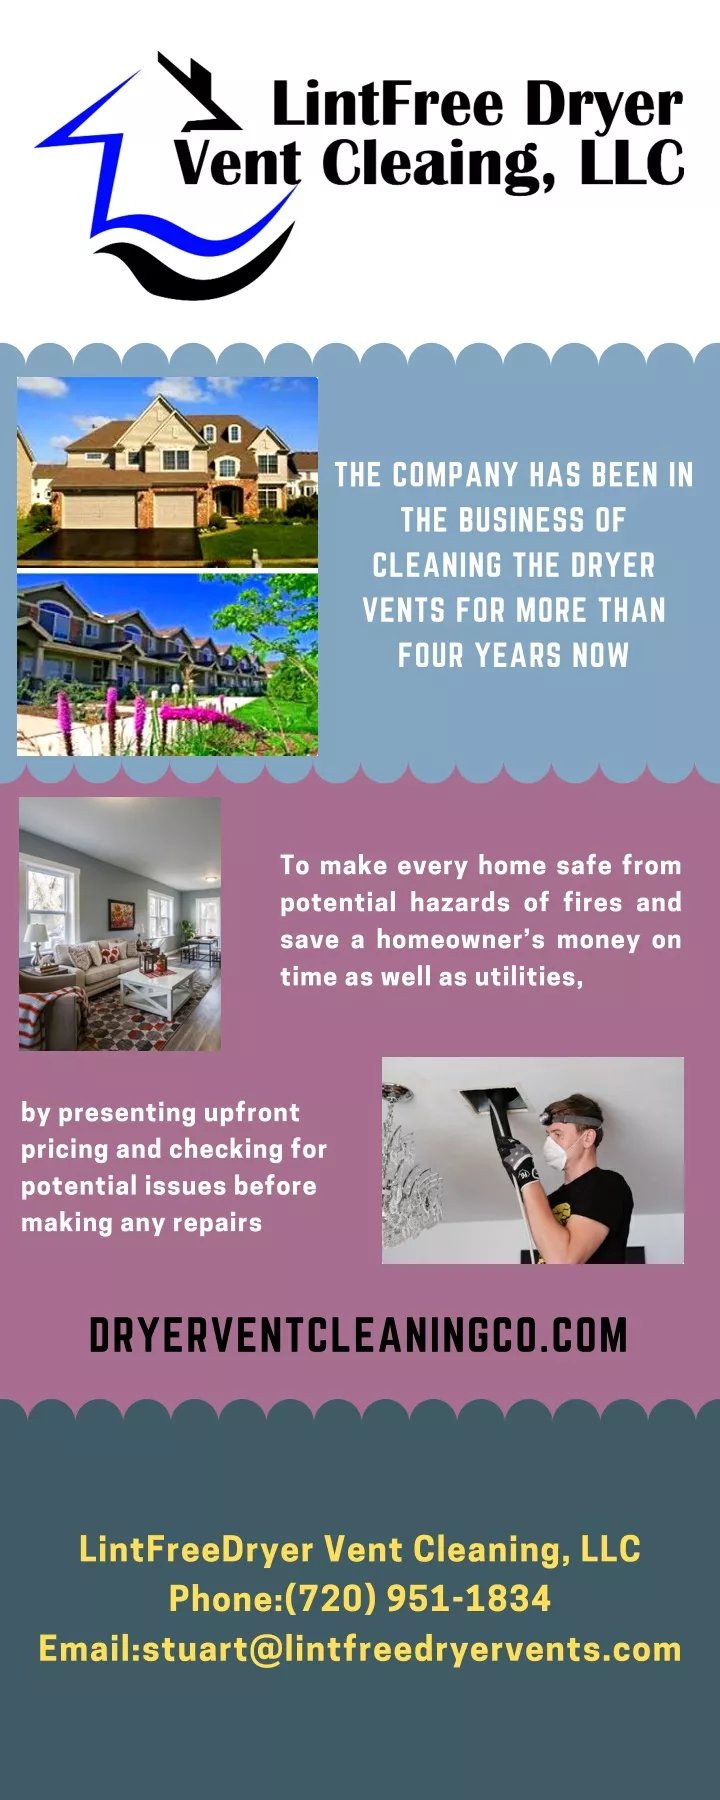 the company has been in the business of cleaning